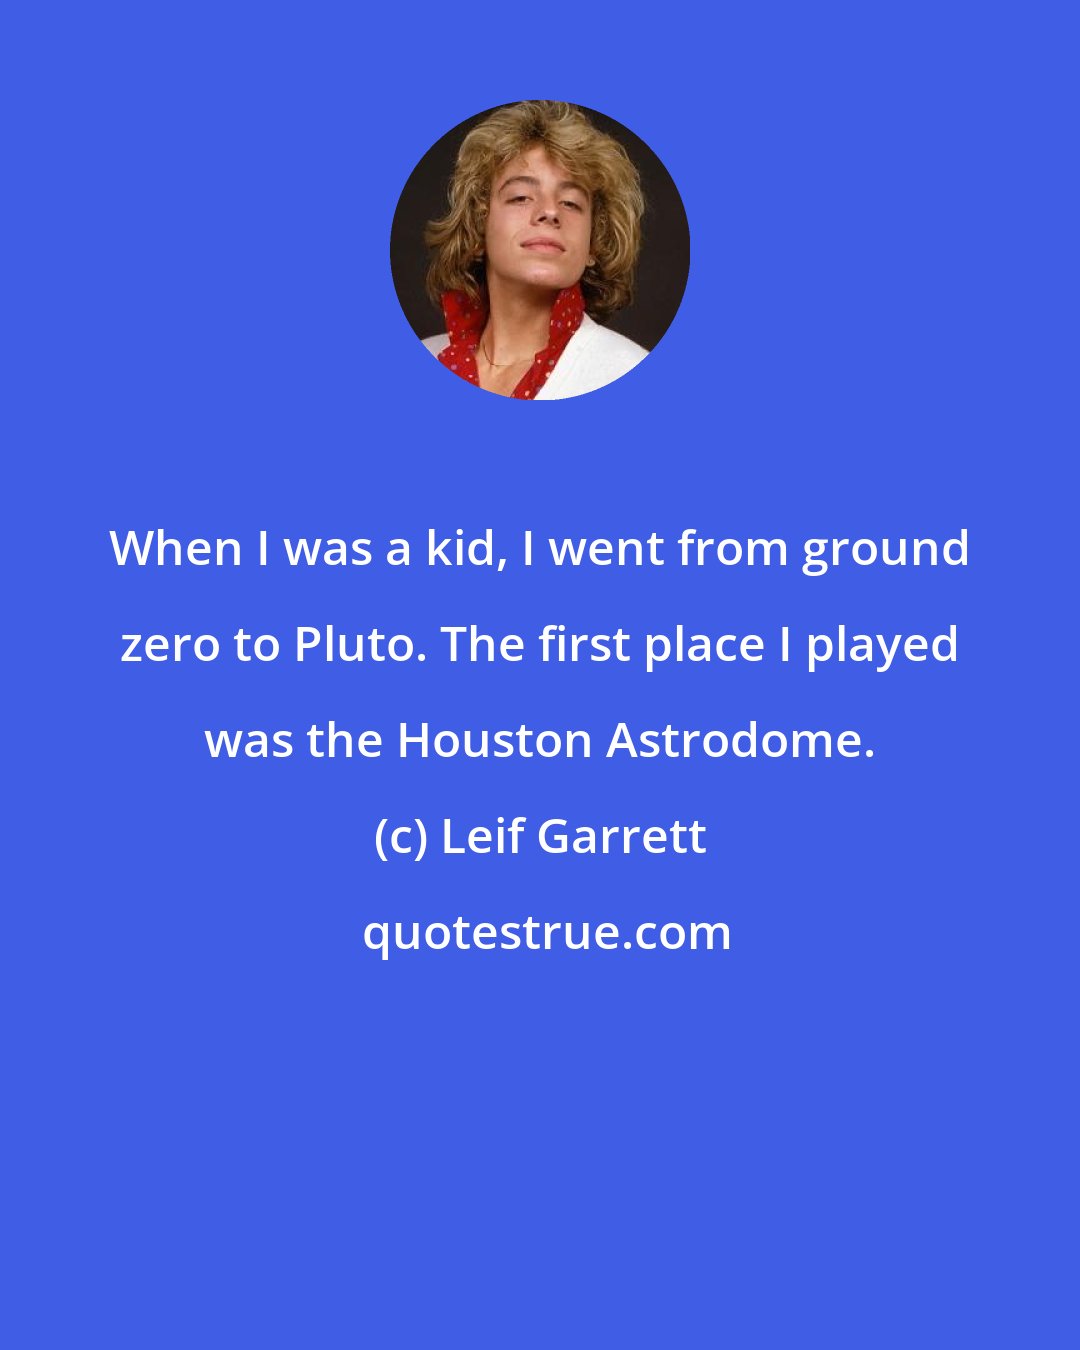 Leif Garrett: When I was a kid, I went from ground zero to Pluto. The first place I played was the Houston Astrodome.